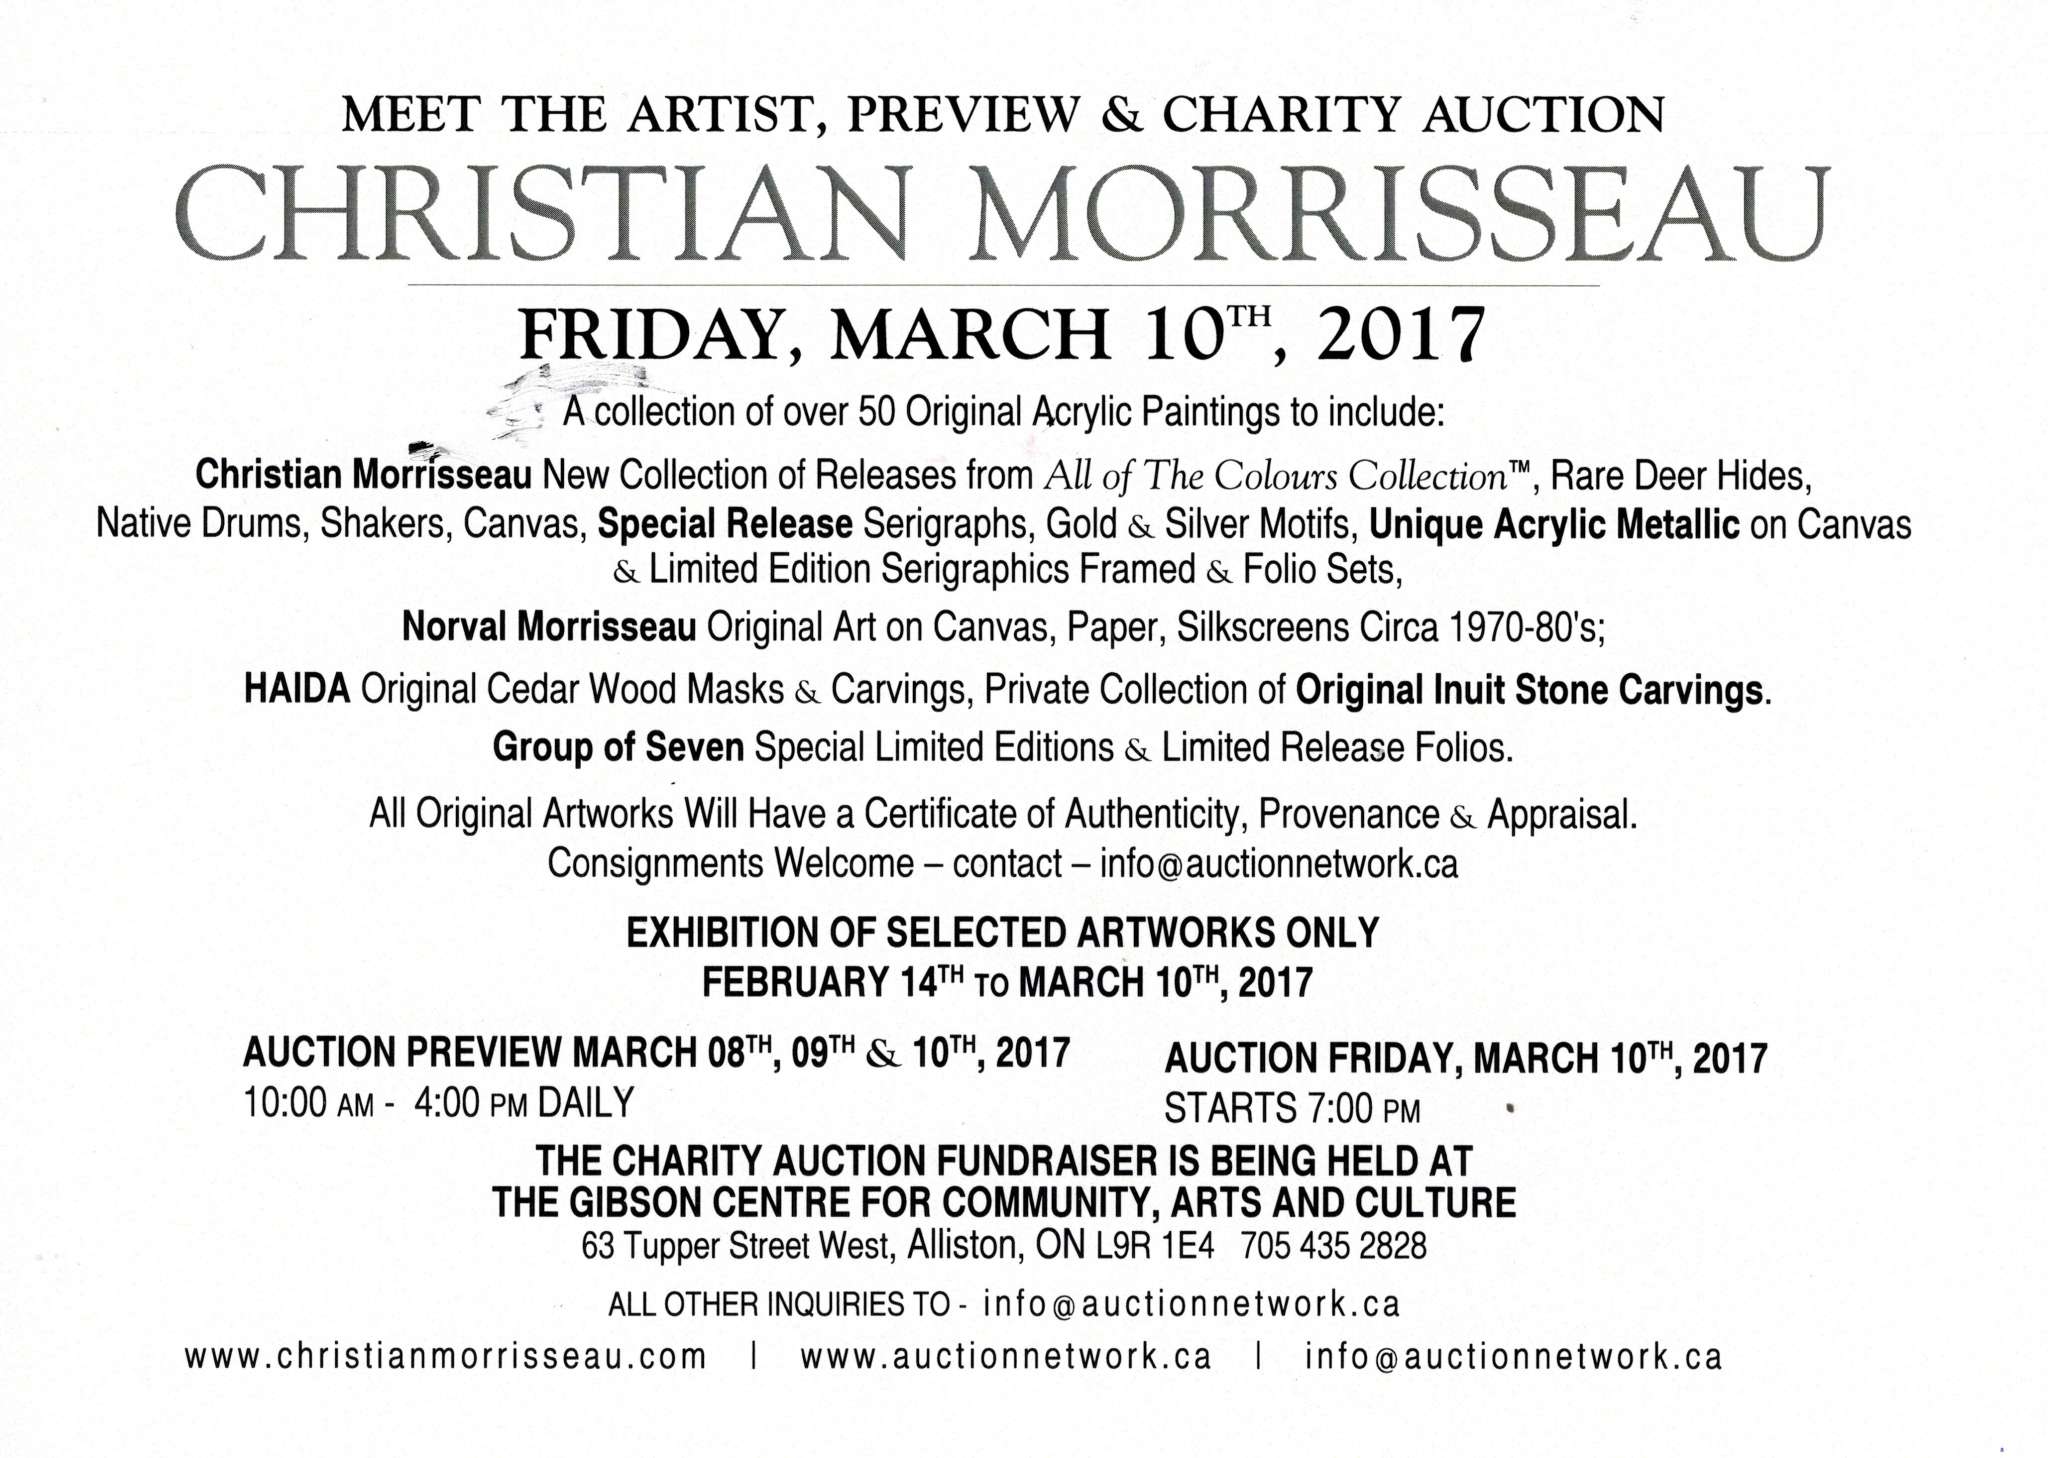 Christian Morrisseau, All of the Colours - Meet The Artist, Preview & Charity Auction